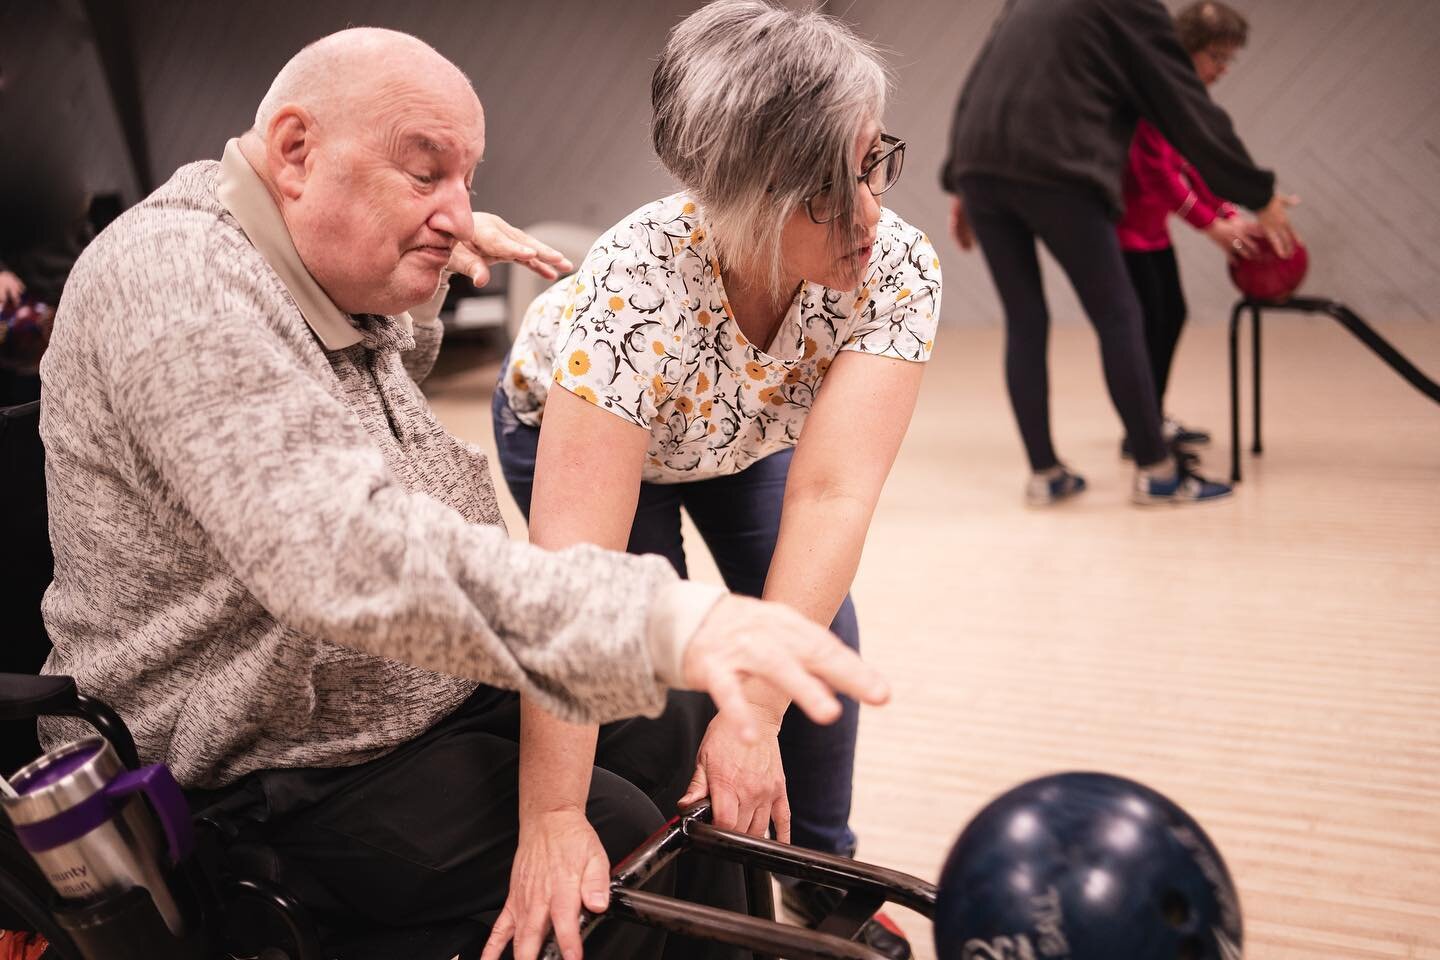 Striking for inclusivity and independence! 🎳 We had a blast at Community Care Connections&rsquo; bowling event, where individuals with disabilities are empowered to thrive in their homes, schools, and communities. Thank you for fostering a more incl